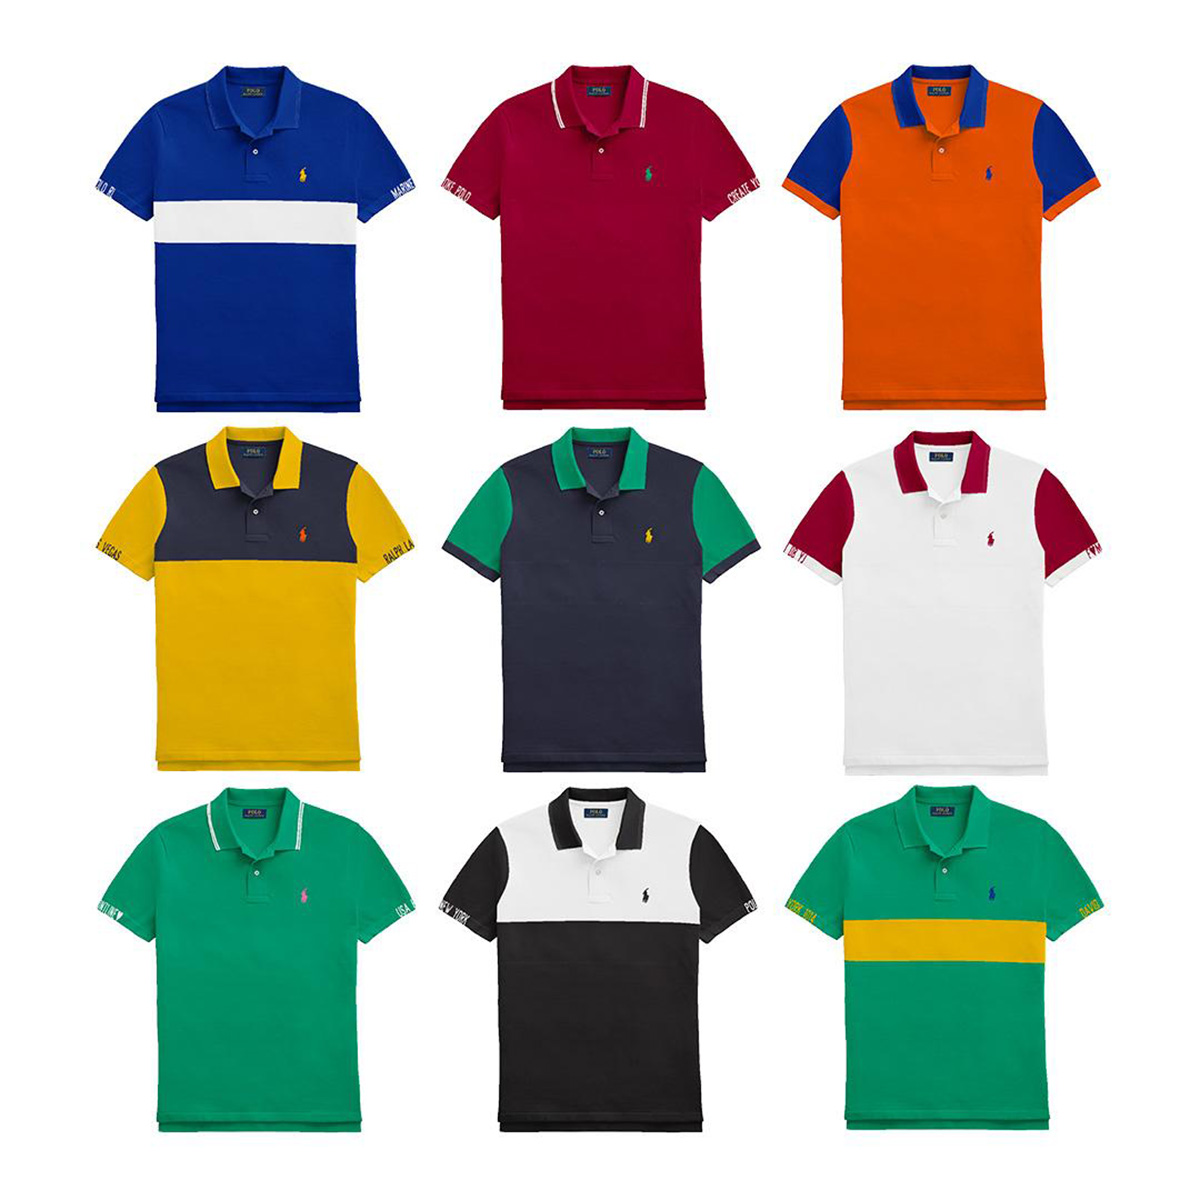 Now You Can Design Your Own Ralph Lauren Polo Shirt